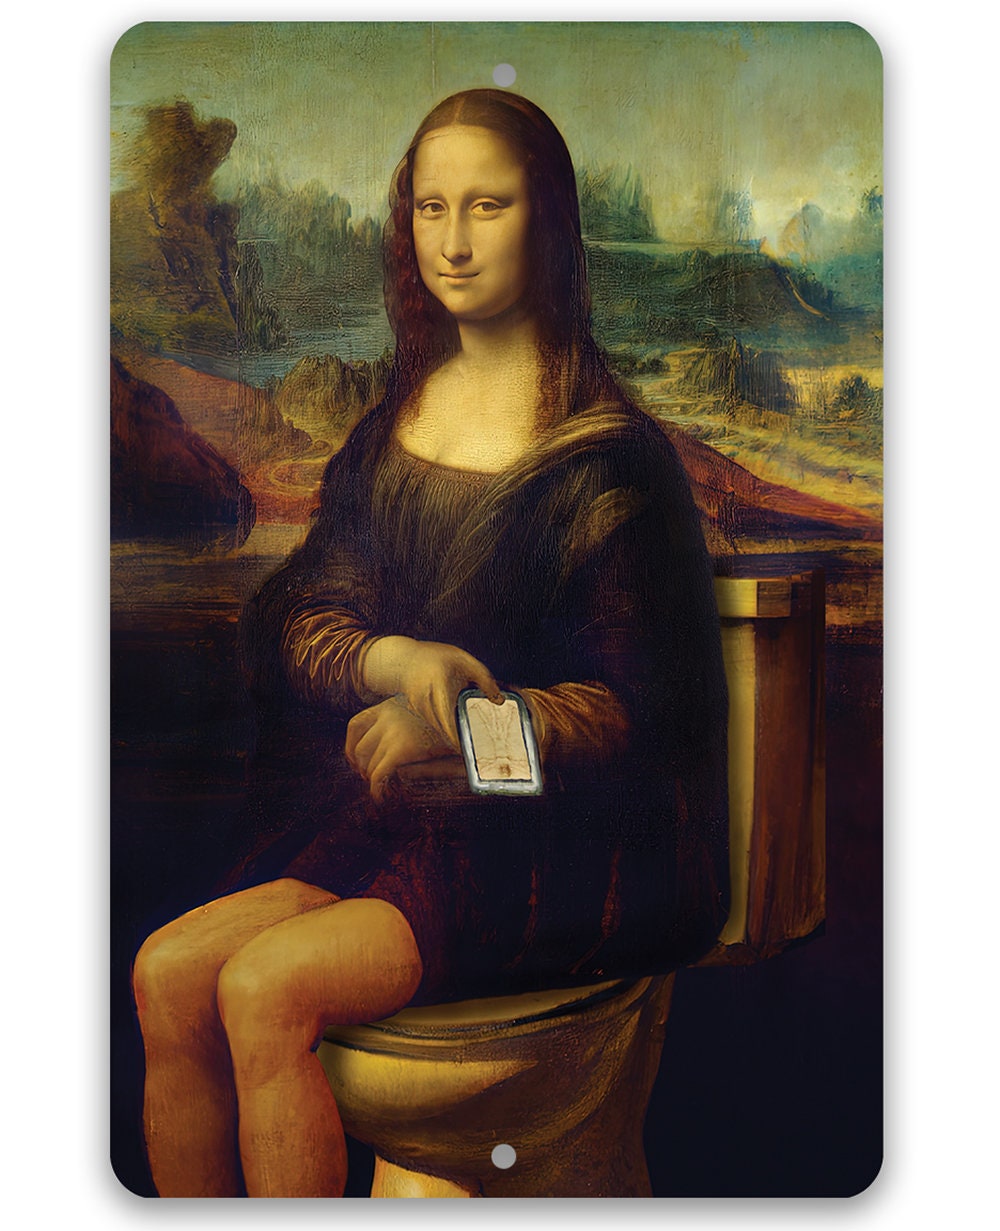 Mona Lisa on the Toilette Painting - Metal Sign Metal Sign Lone Star Art 